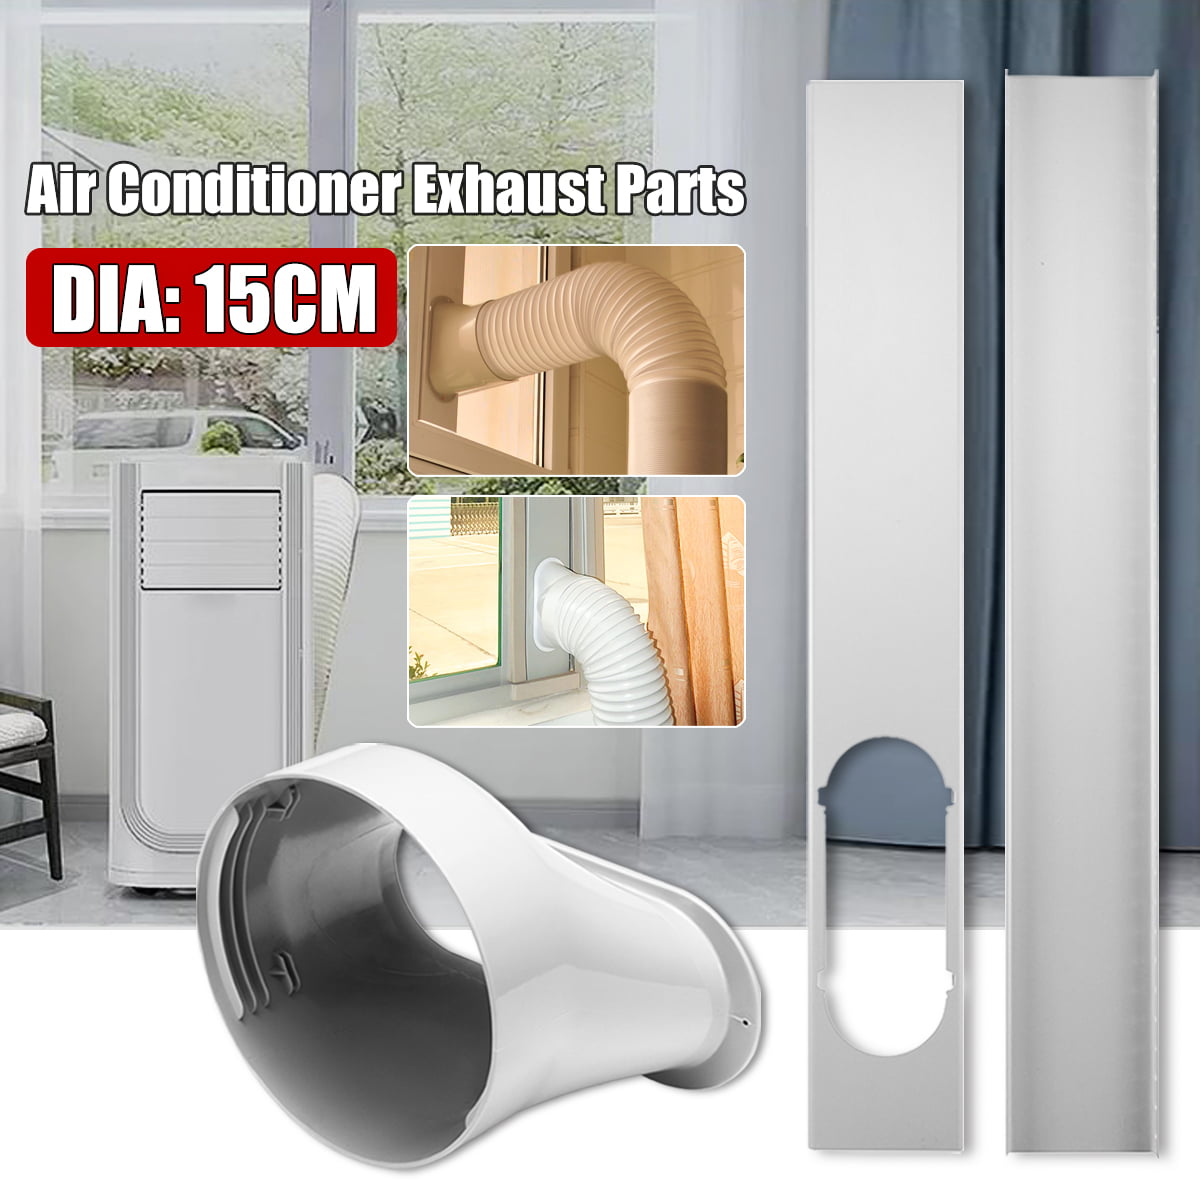 15CM Portable Air Conditioner Window Kit Plate Exhaust Duct Pipe Hose Interface 